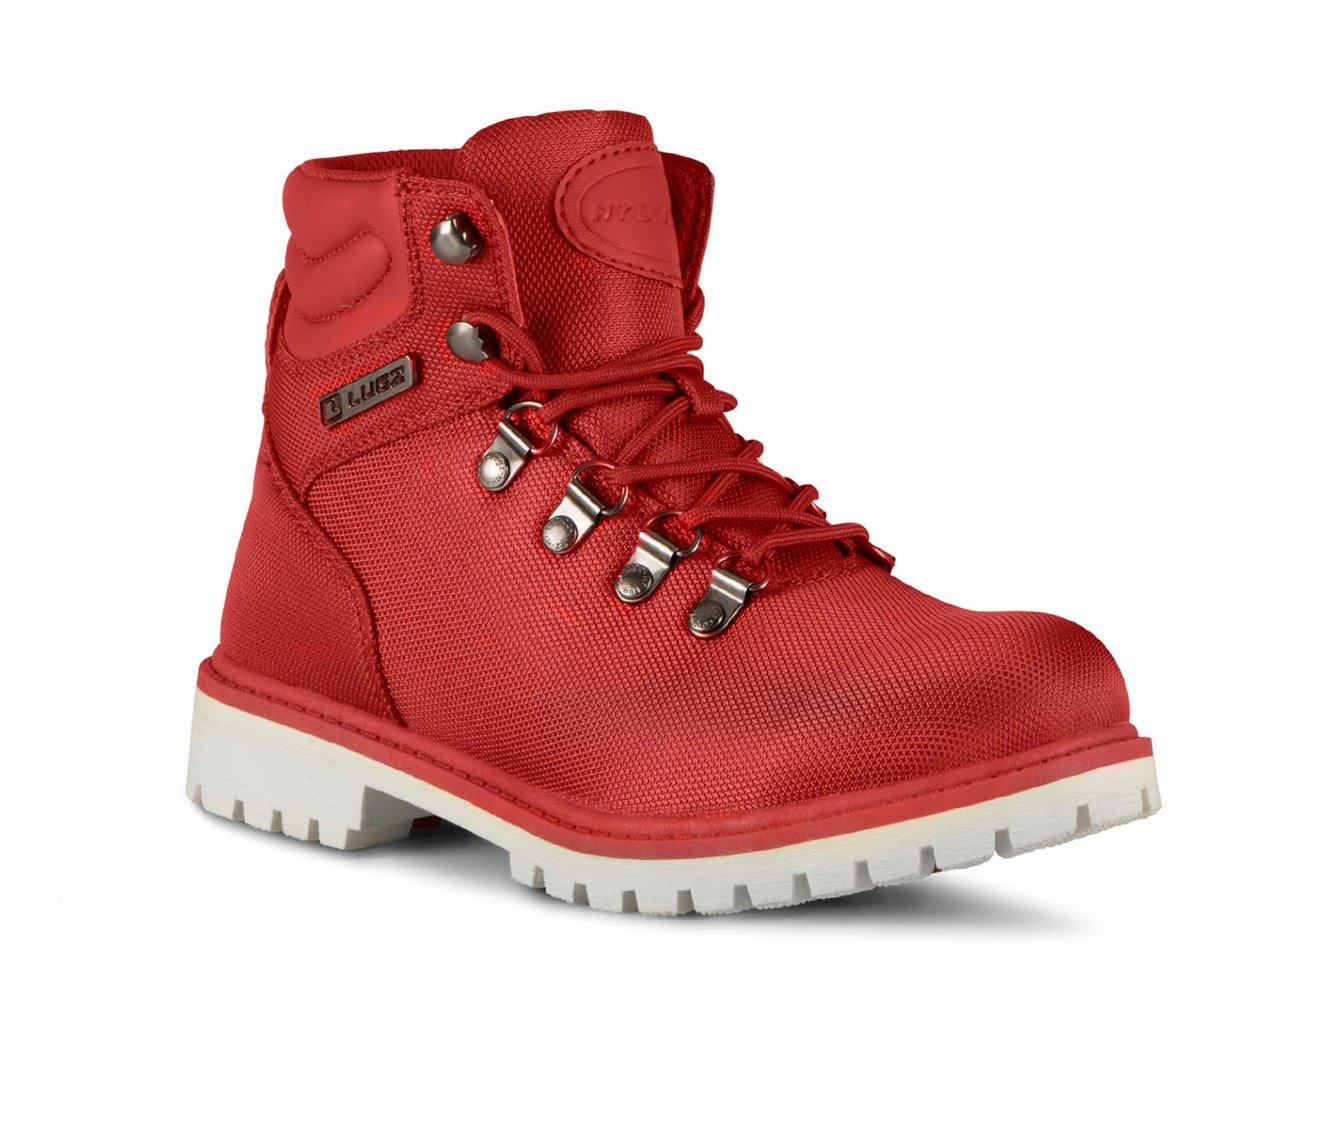 Women's Lugz Grotto II Lace-Up Boots | Shoe Carnival